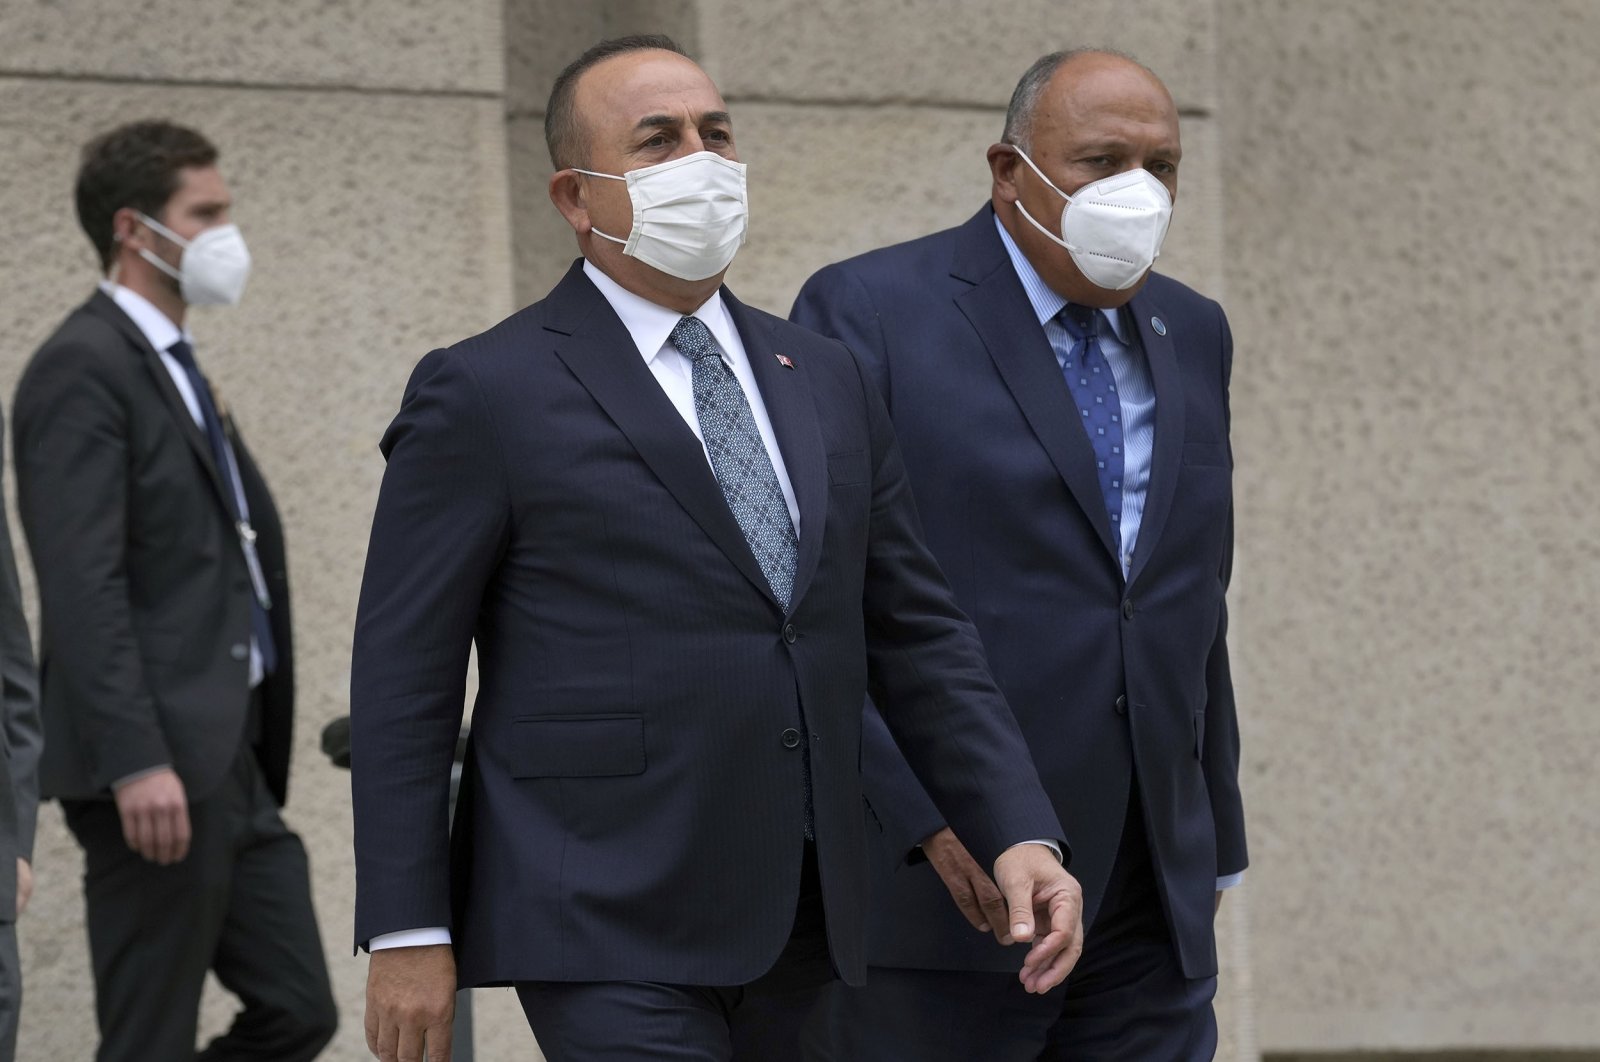 Turkey’s Foreign Minister Mevlüt Çavuşoğlu (L) and his counterpart from Egypt, Sameh Shoukry (R) arrive for a group photo during the Second Berlin Conference on Libya at the foreign office in Berlin, Germany, June 23, 2021. (AP Photo)